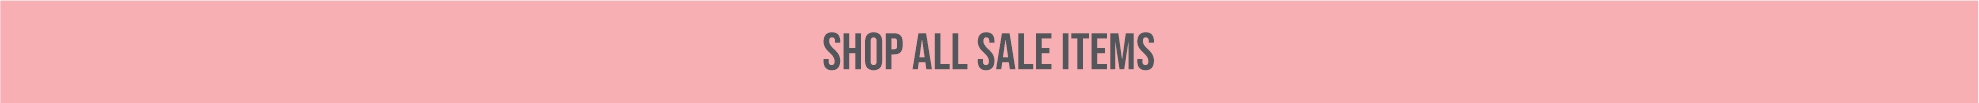 Shop All Sale Items